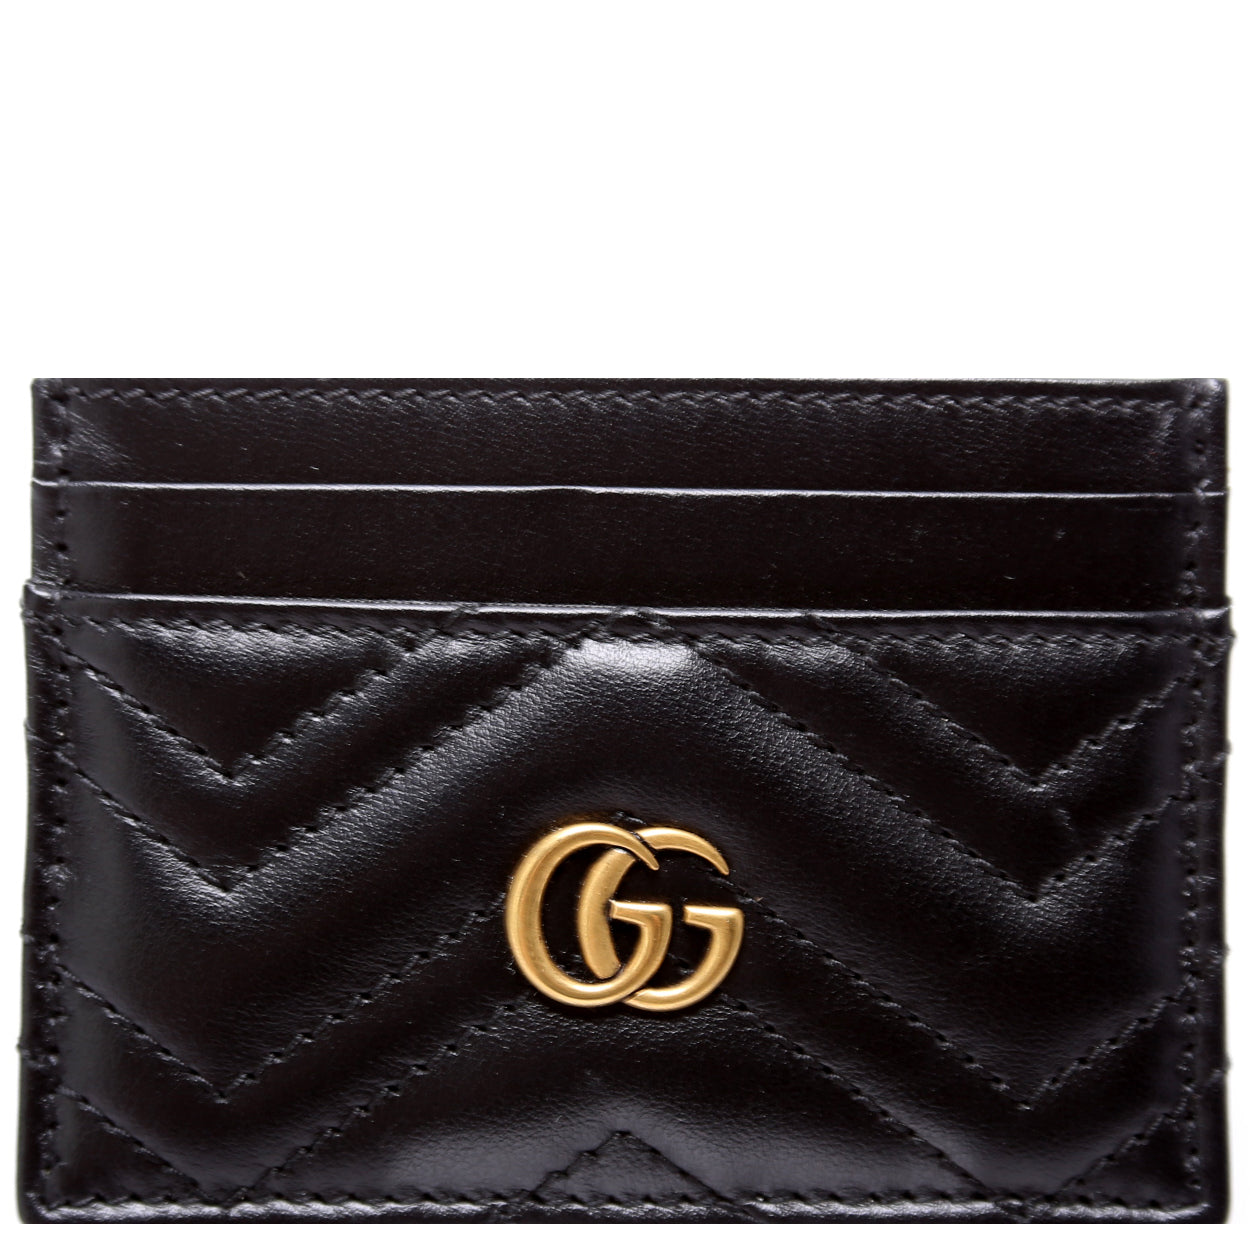 gucci marmont samt - OFF-60% > Shipping free